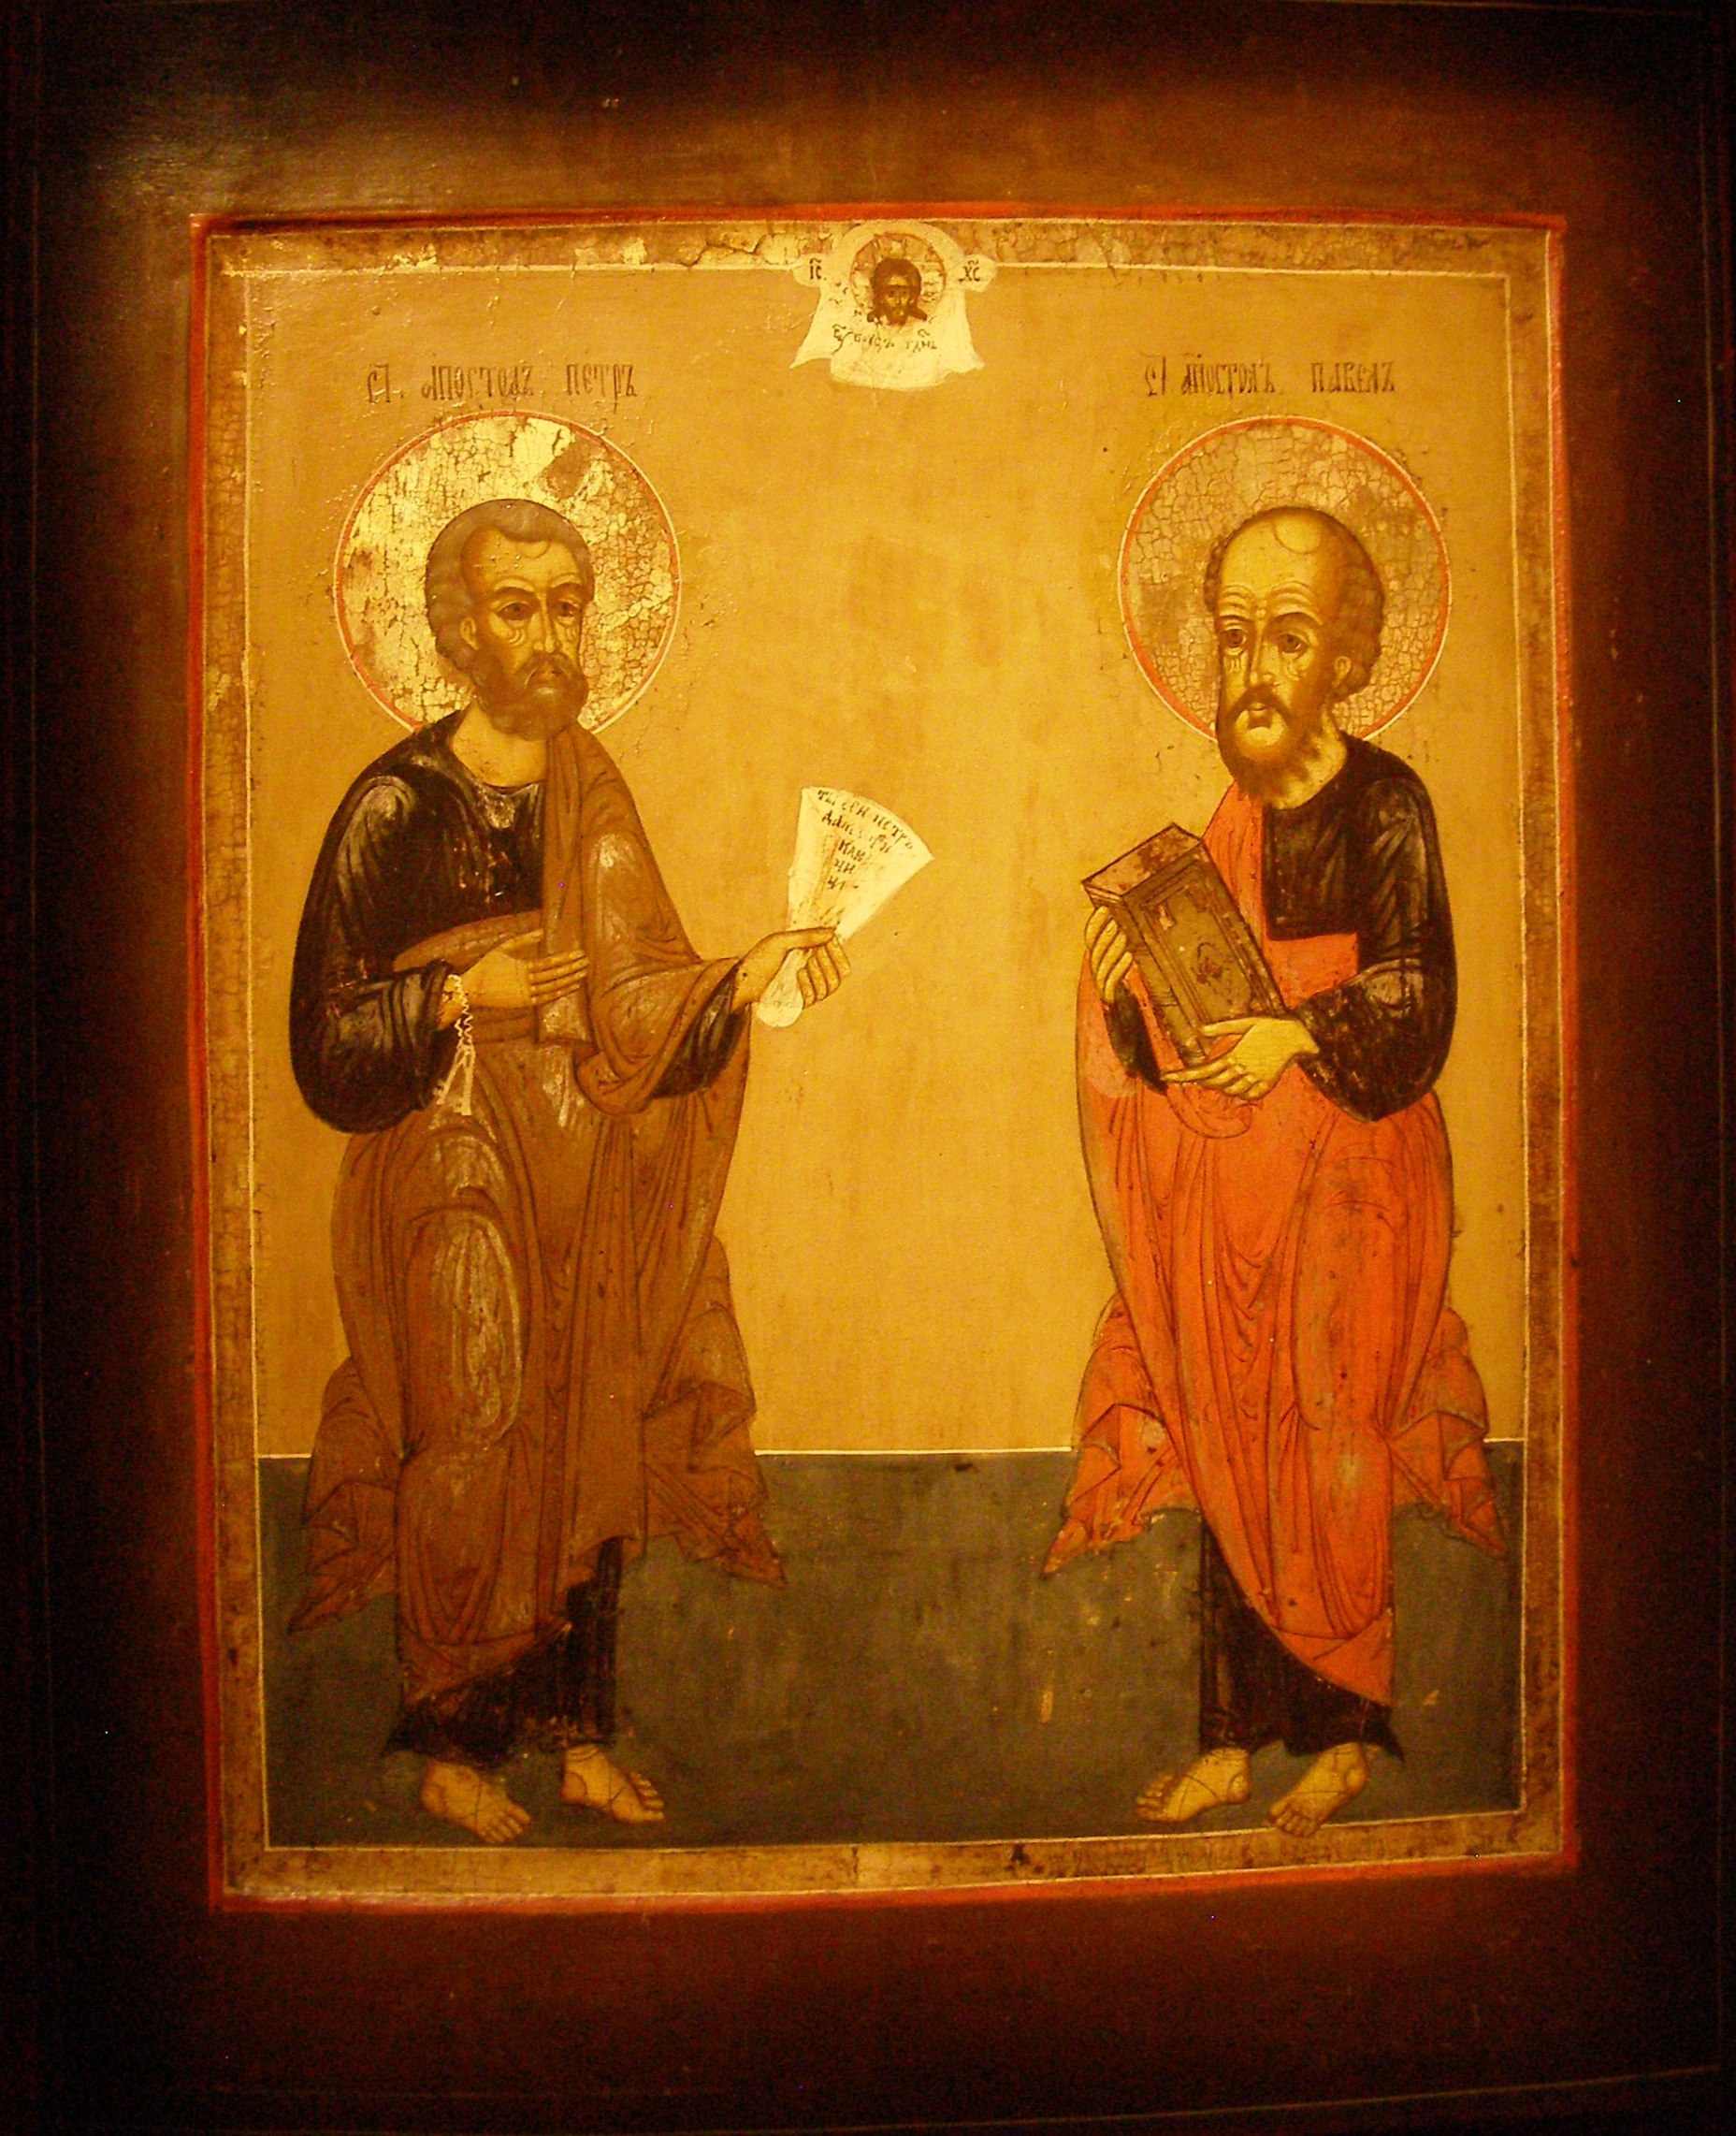 Saint Peter and Paul: Supraśl - Museum of Icons